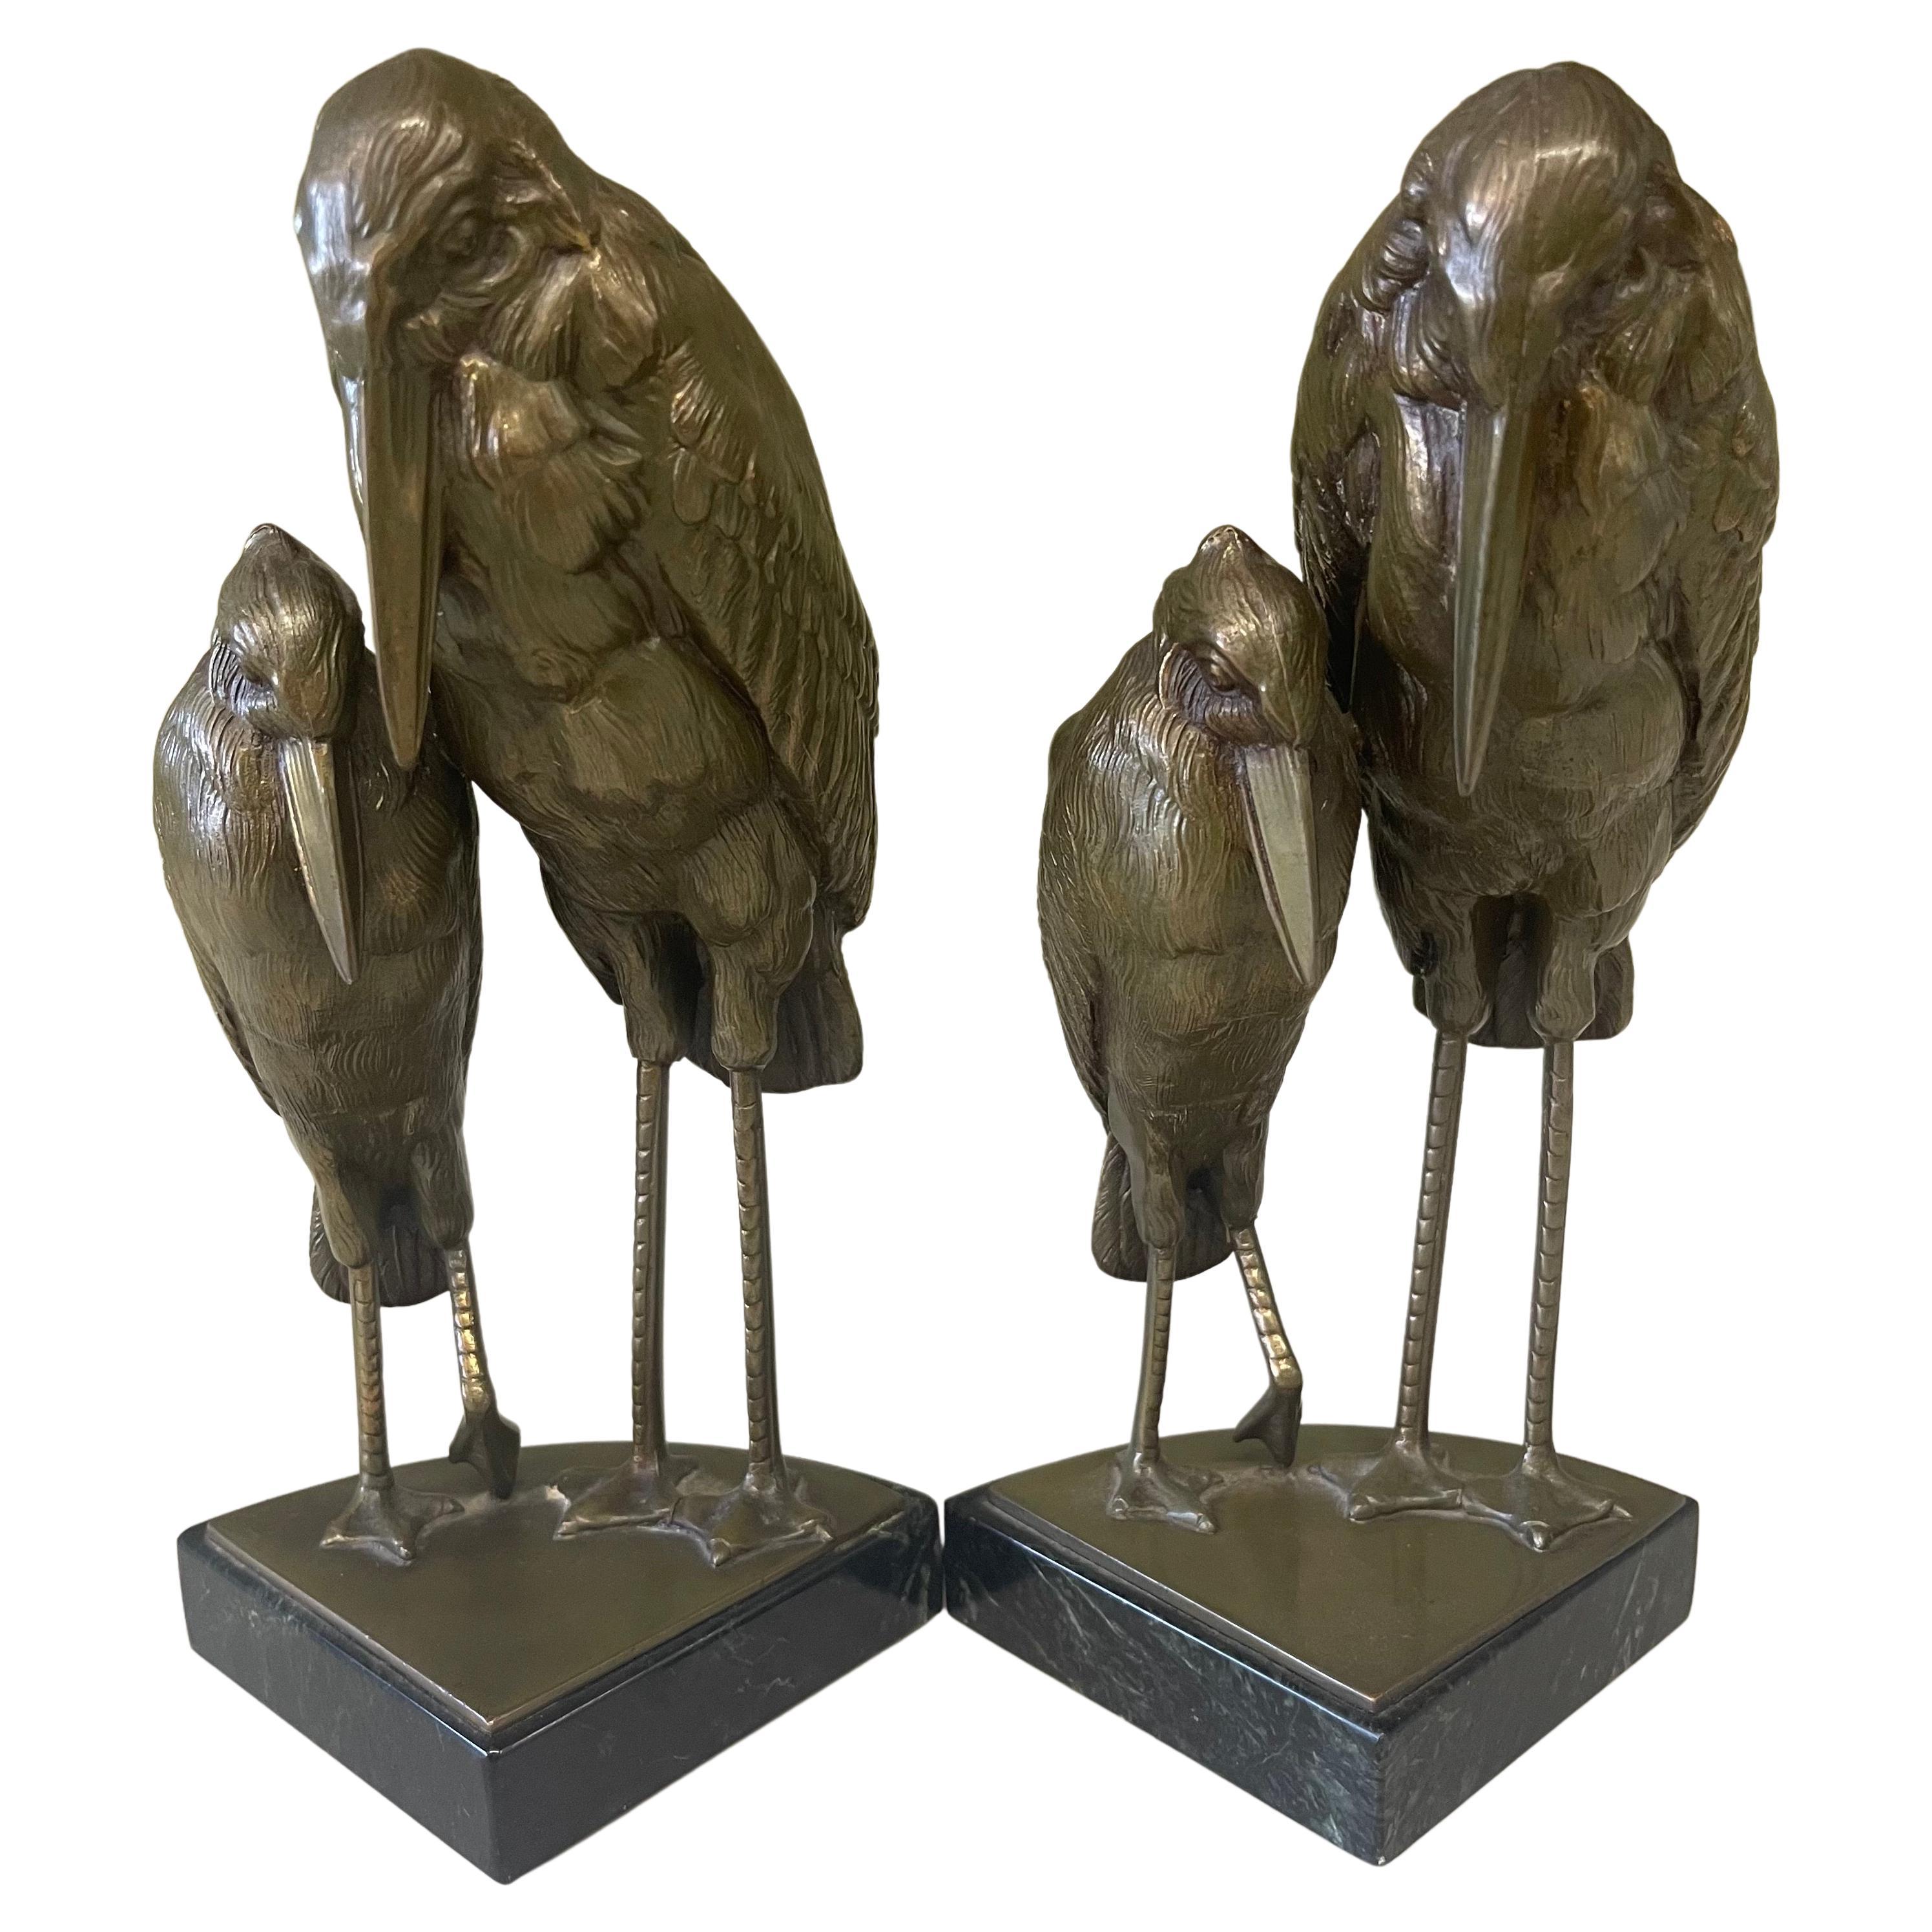 Pair of Marabou Stork Art Deco Bookends in the Style of Marcel-Andre’ Bouraine